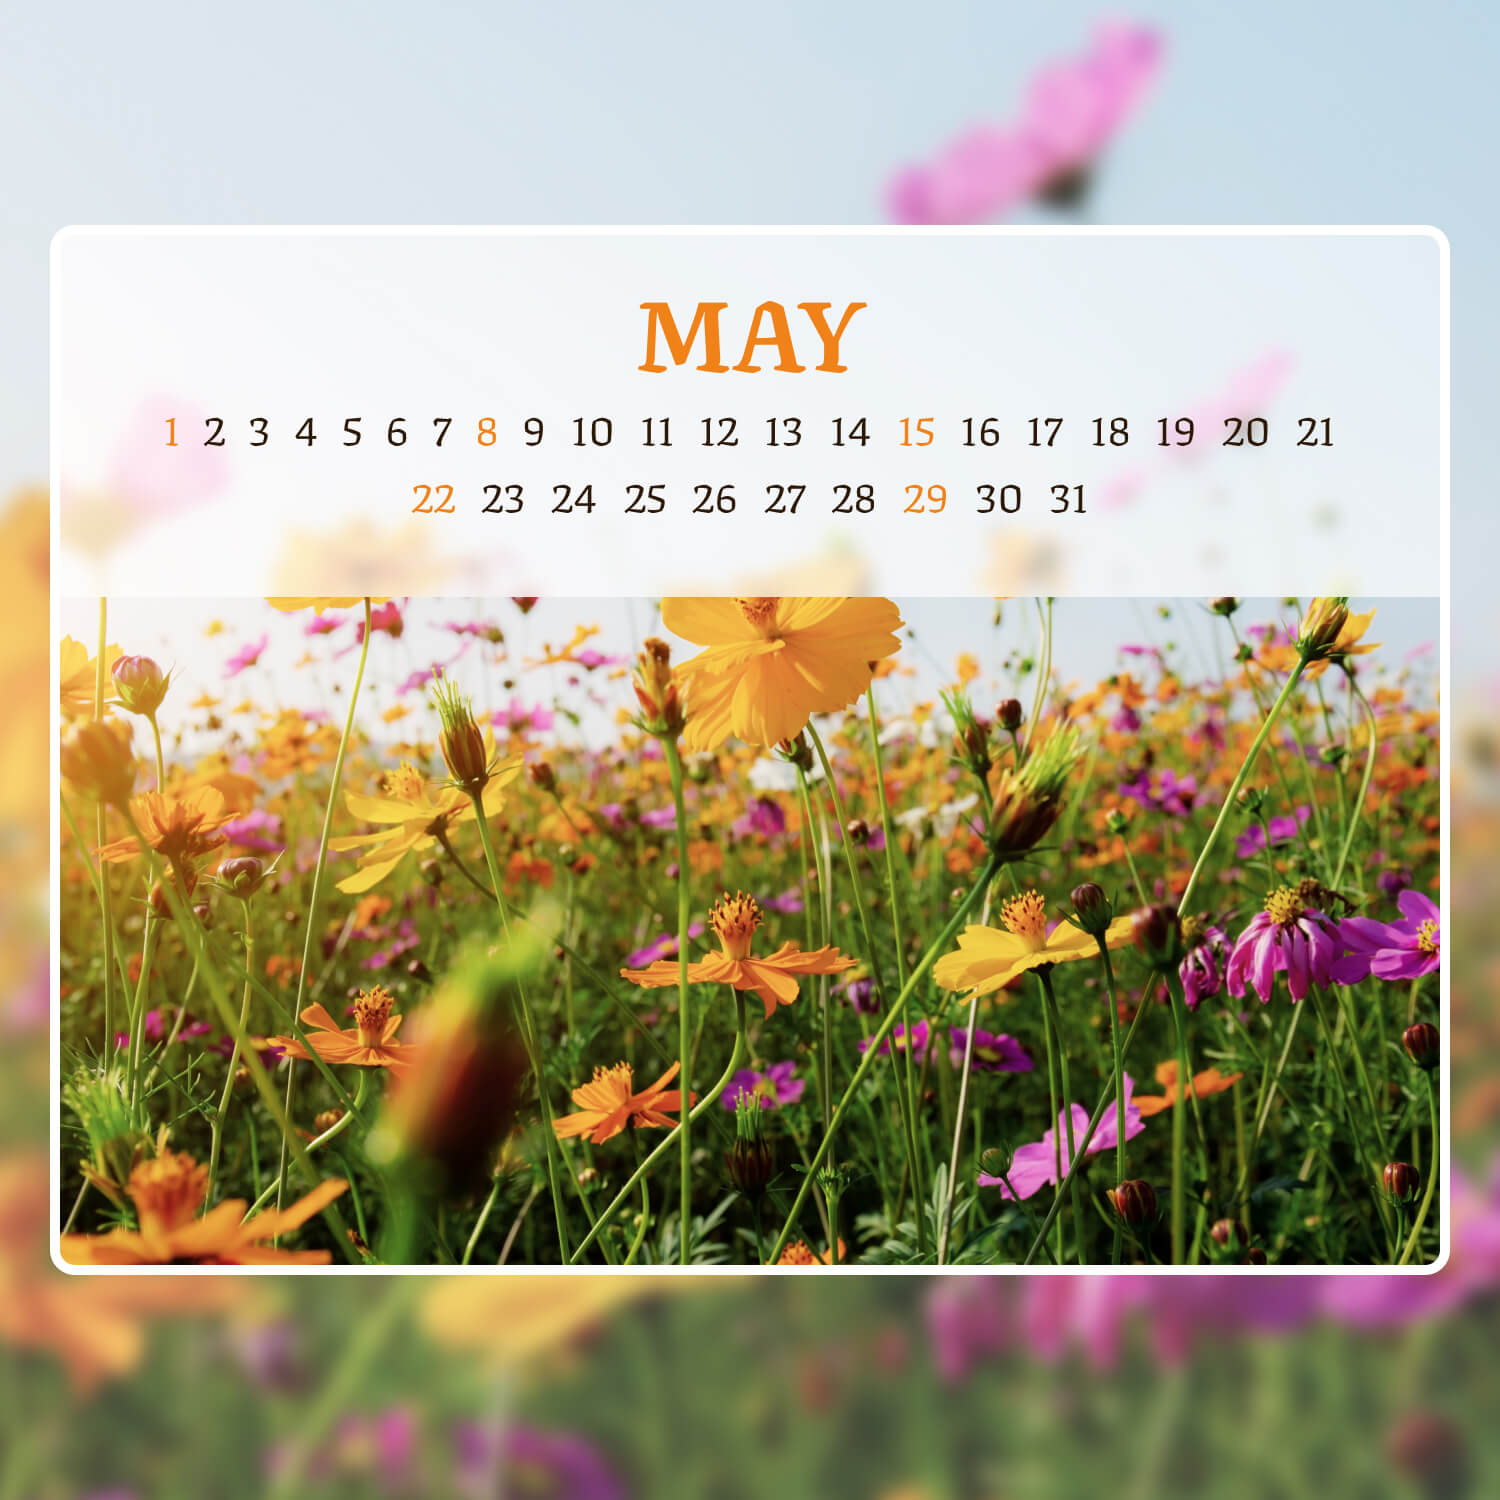 Free Wild Flowers Editable May Calendar cover image.